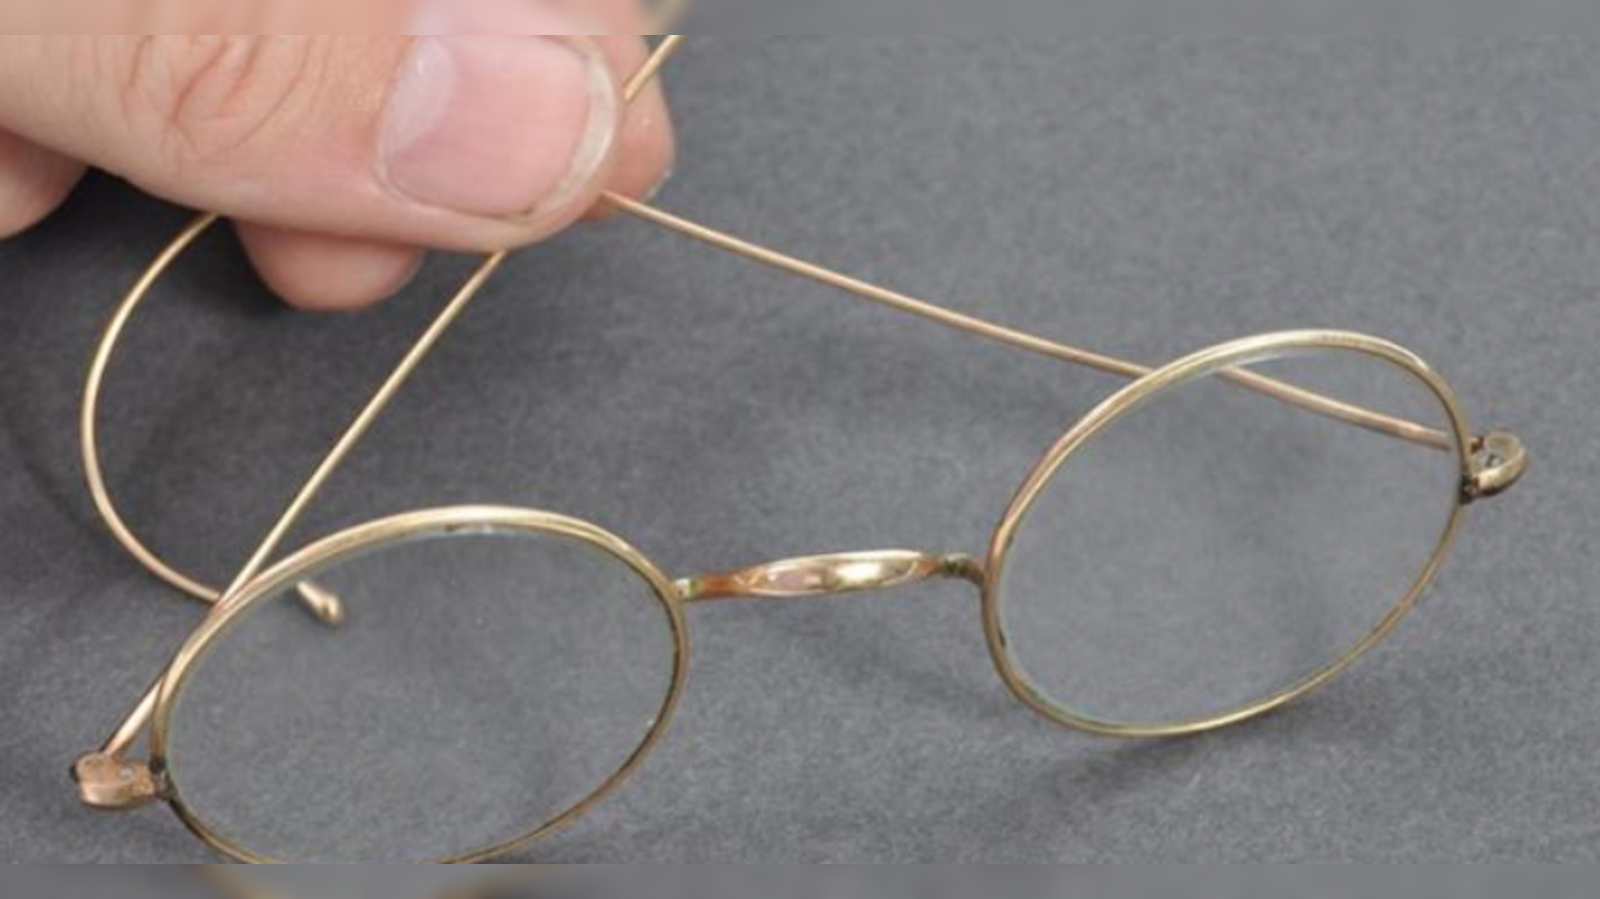 Truly Iconic Spectacles: The Humble, Round Pair | You&Eye Magazine